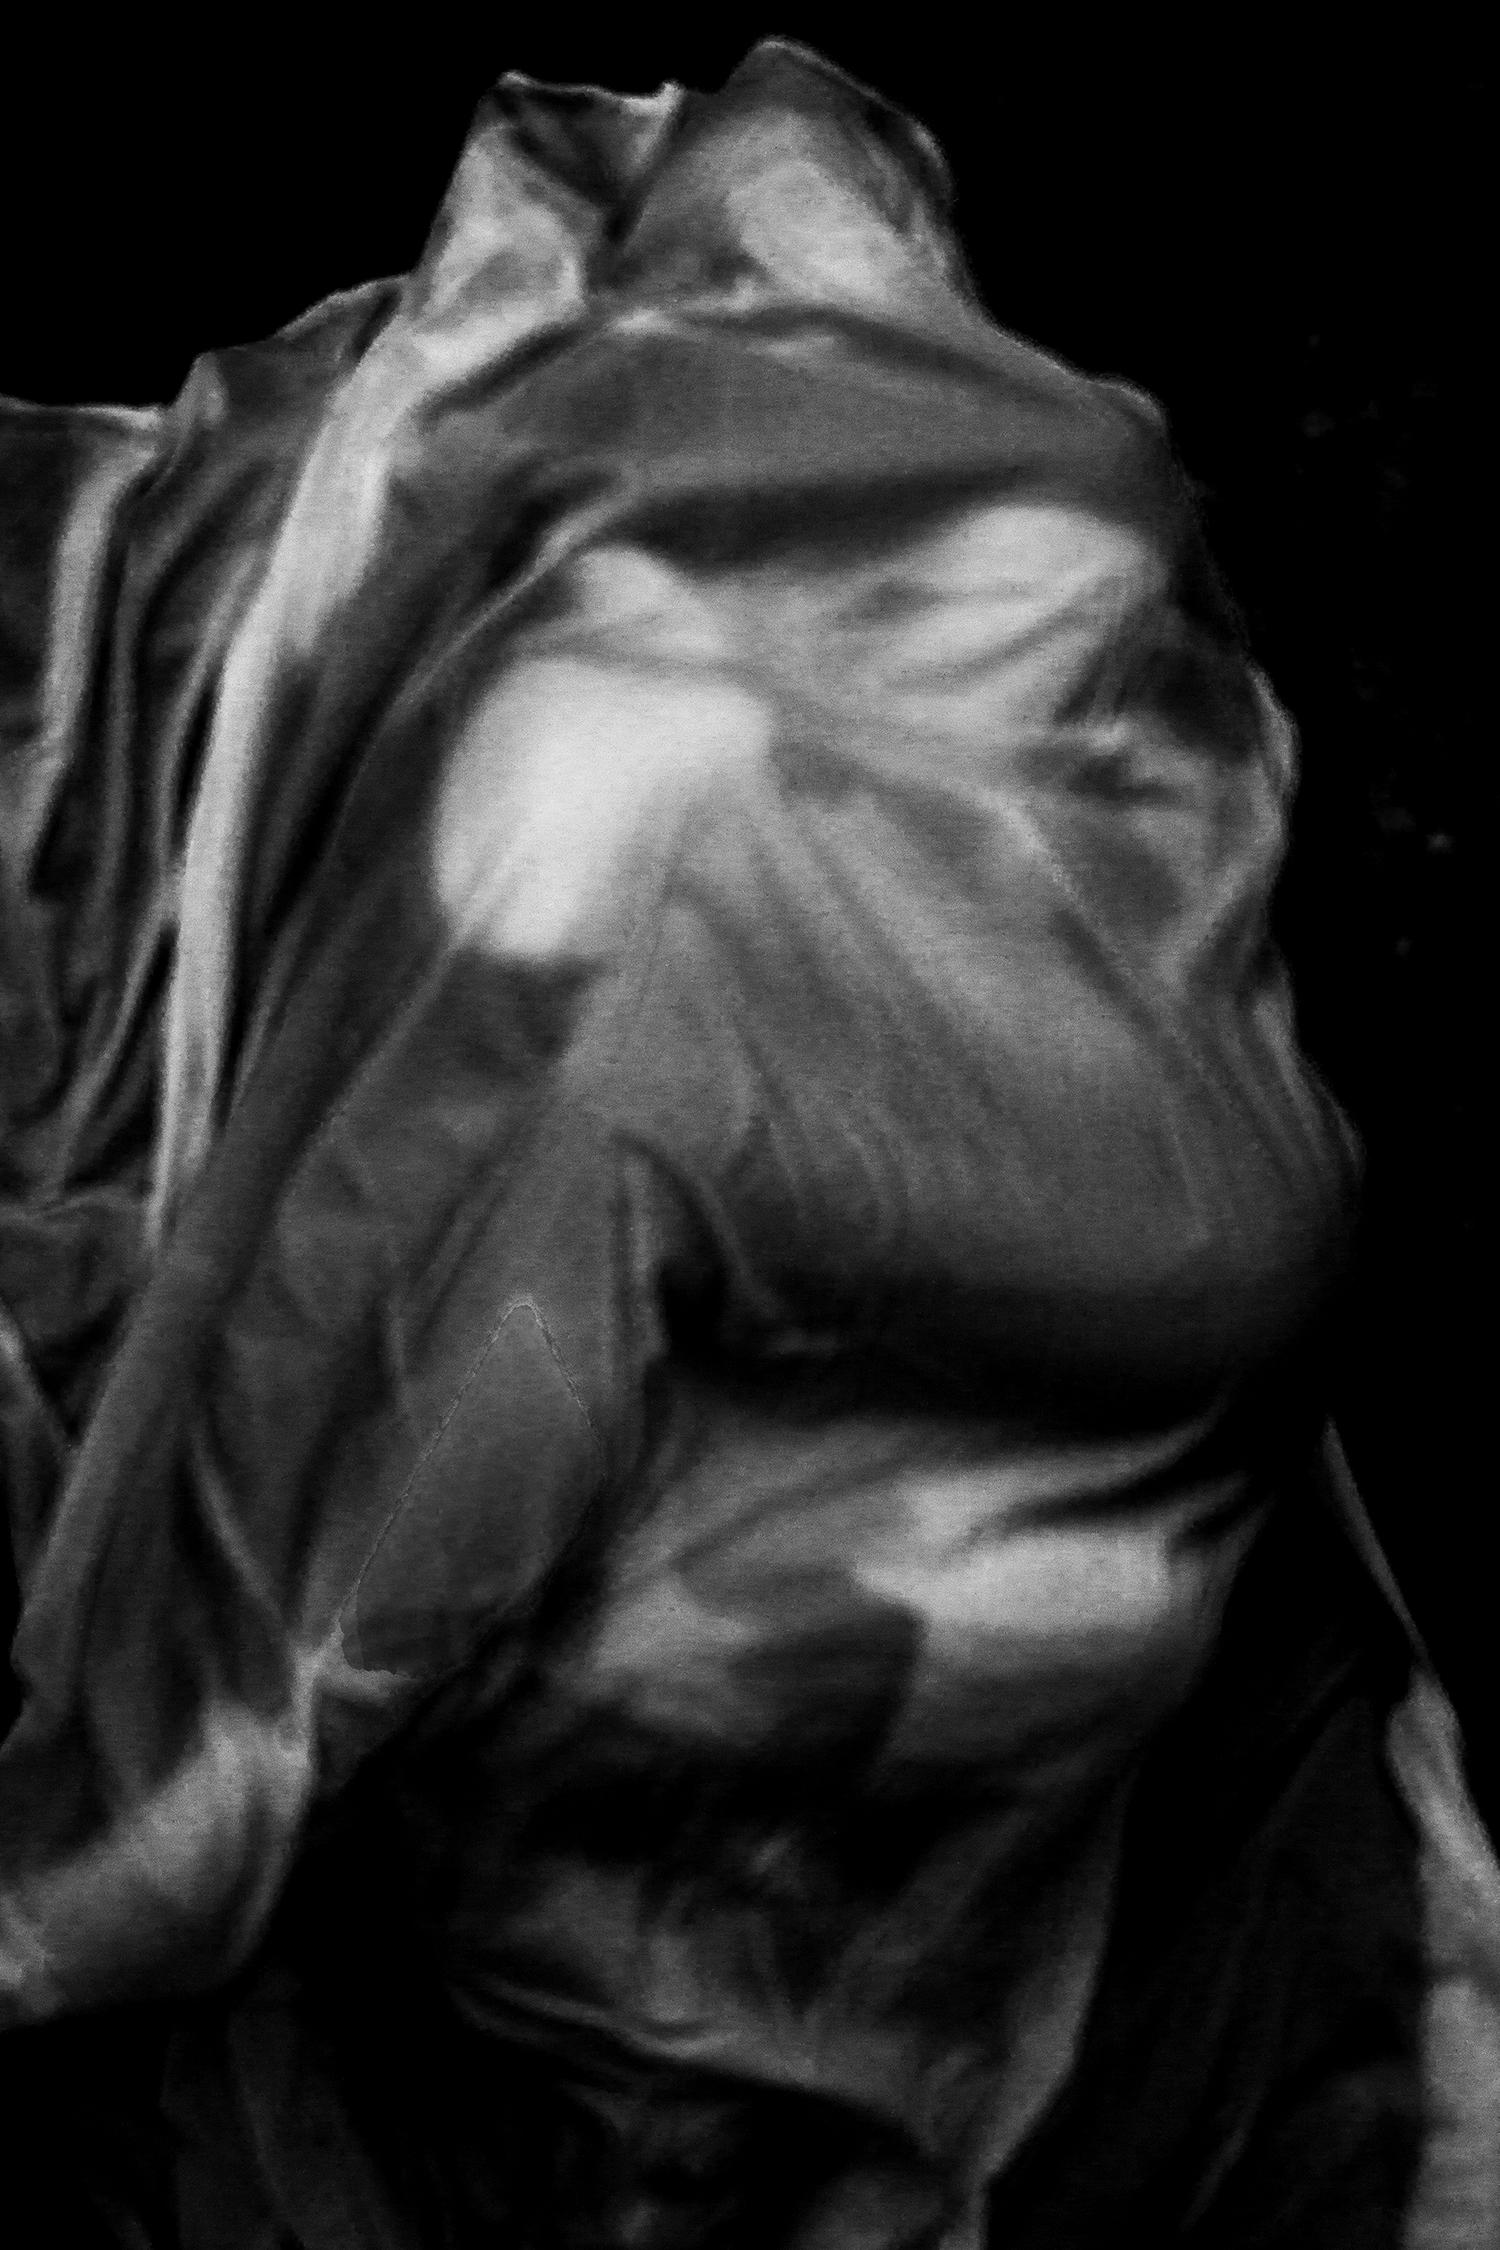 Two figures draped in fabric wrapping around each other.